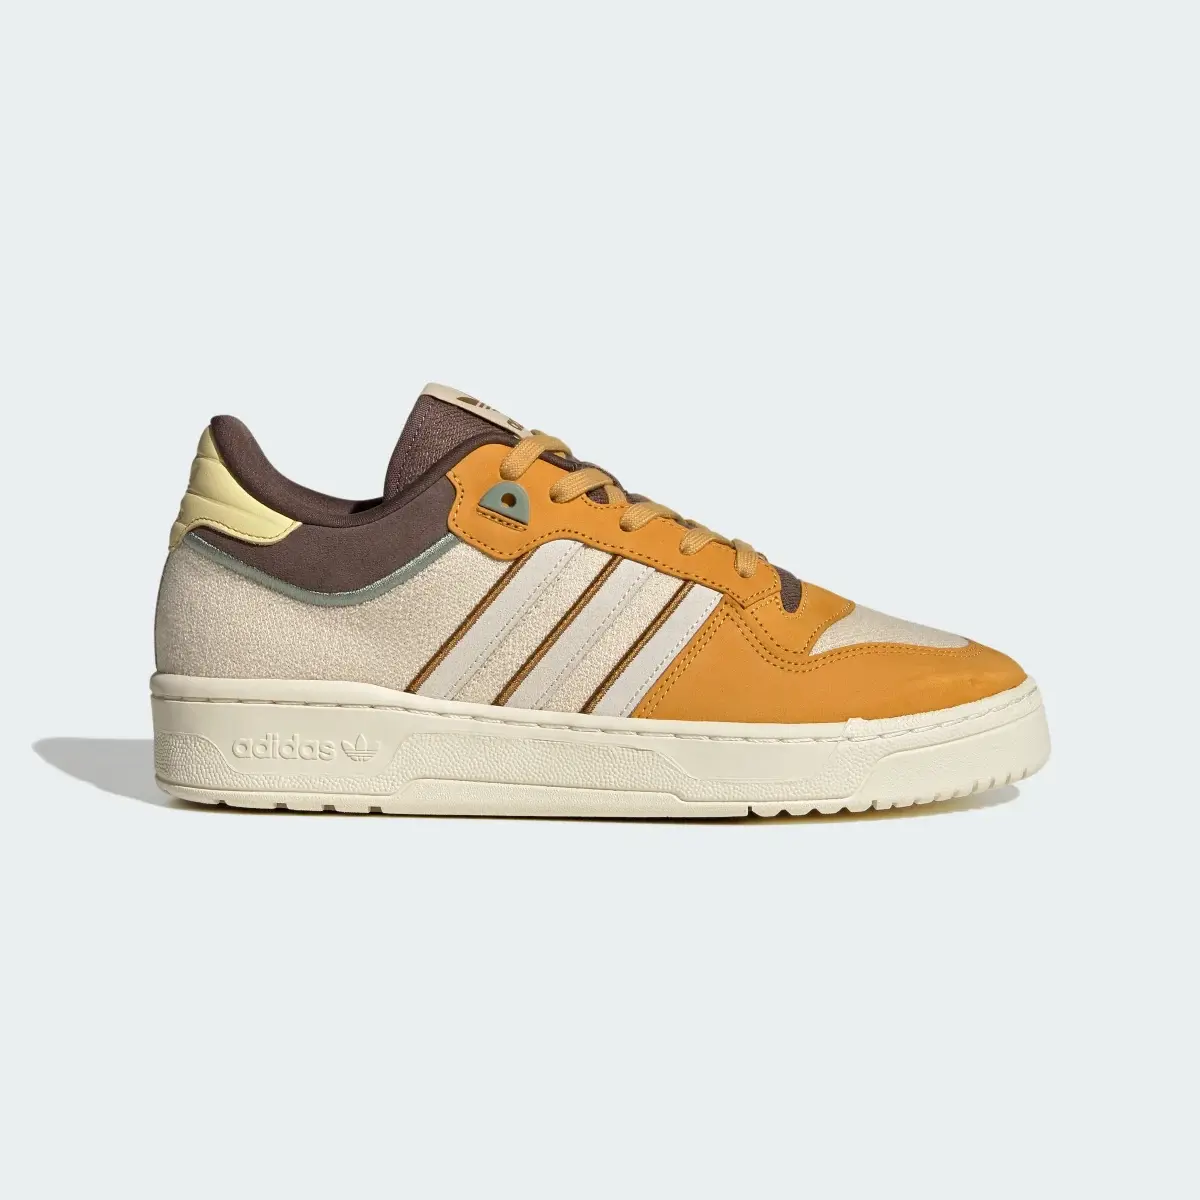 Adidas Rivalry Low 86 Basketball Shoes. 2